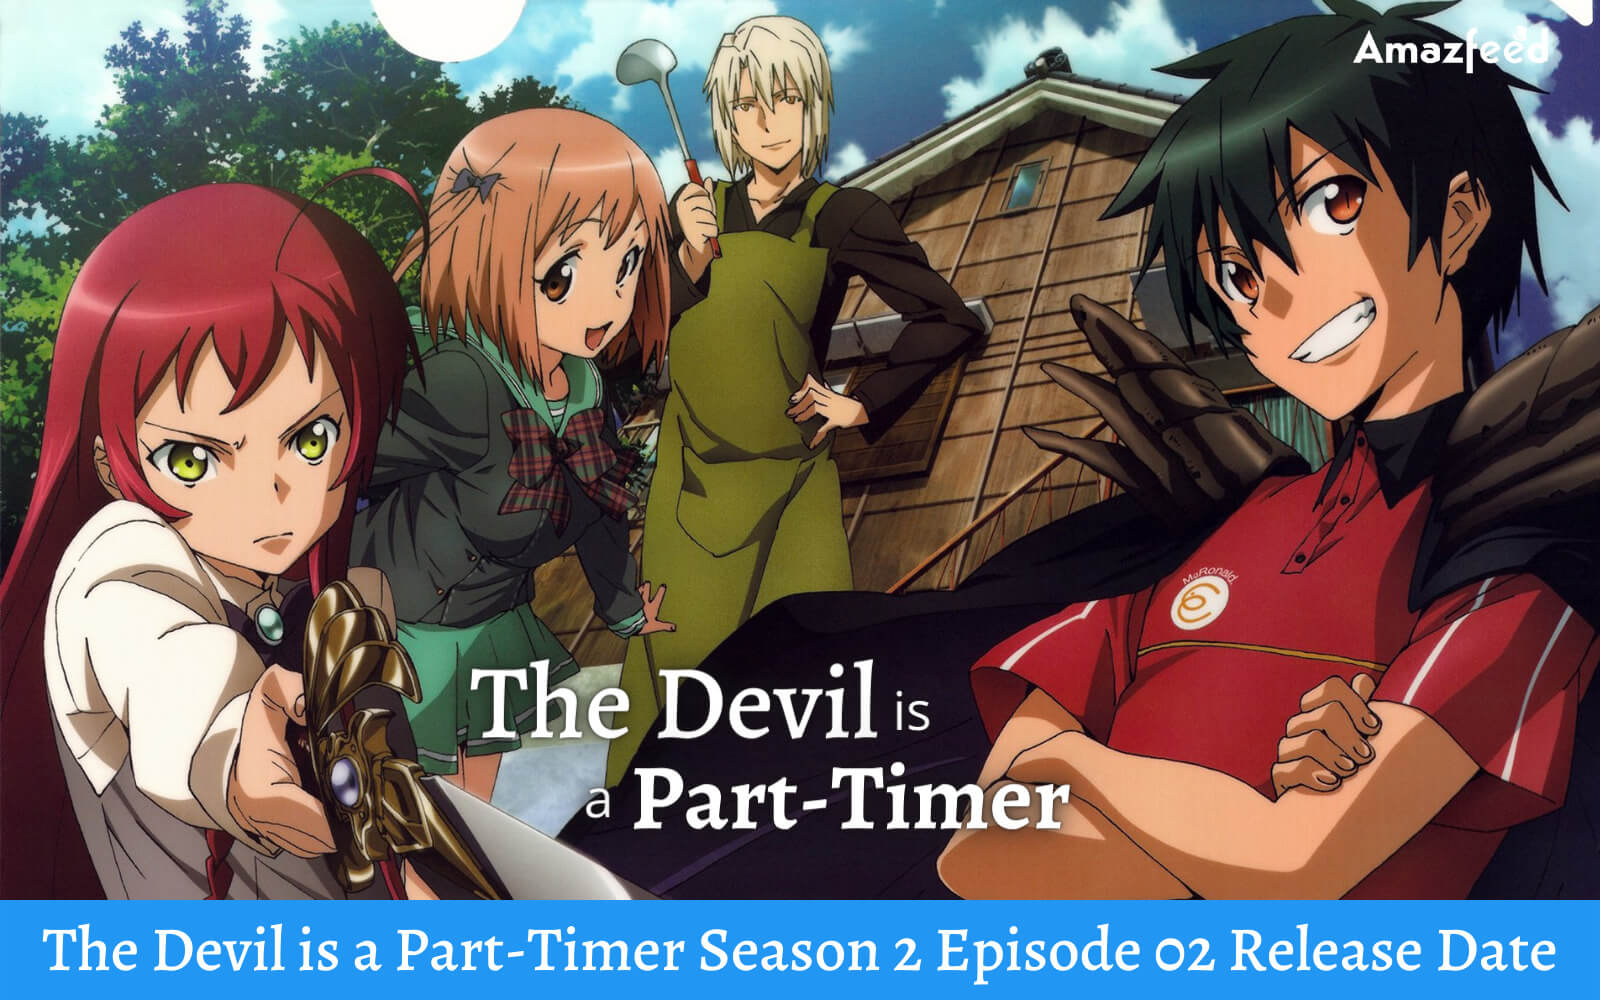 The Devil is a Part-Timer Season 2 Episode 02 Release Date